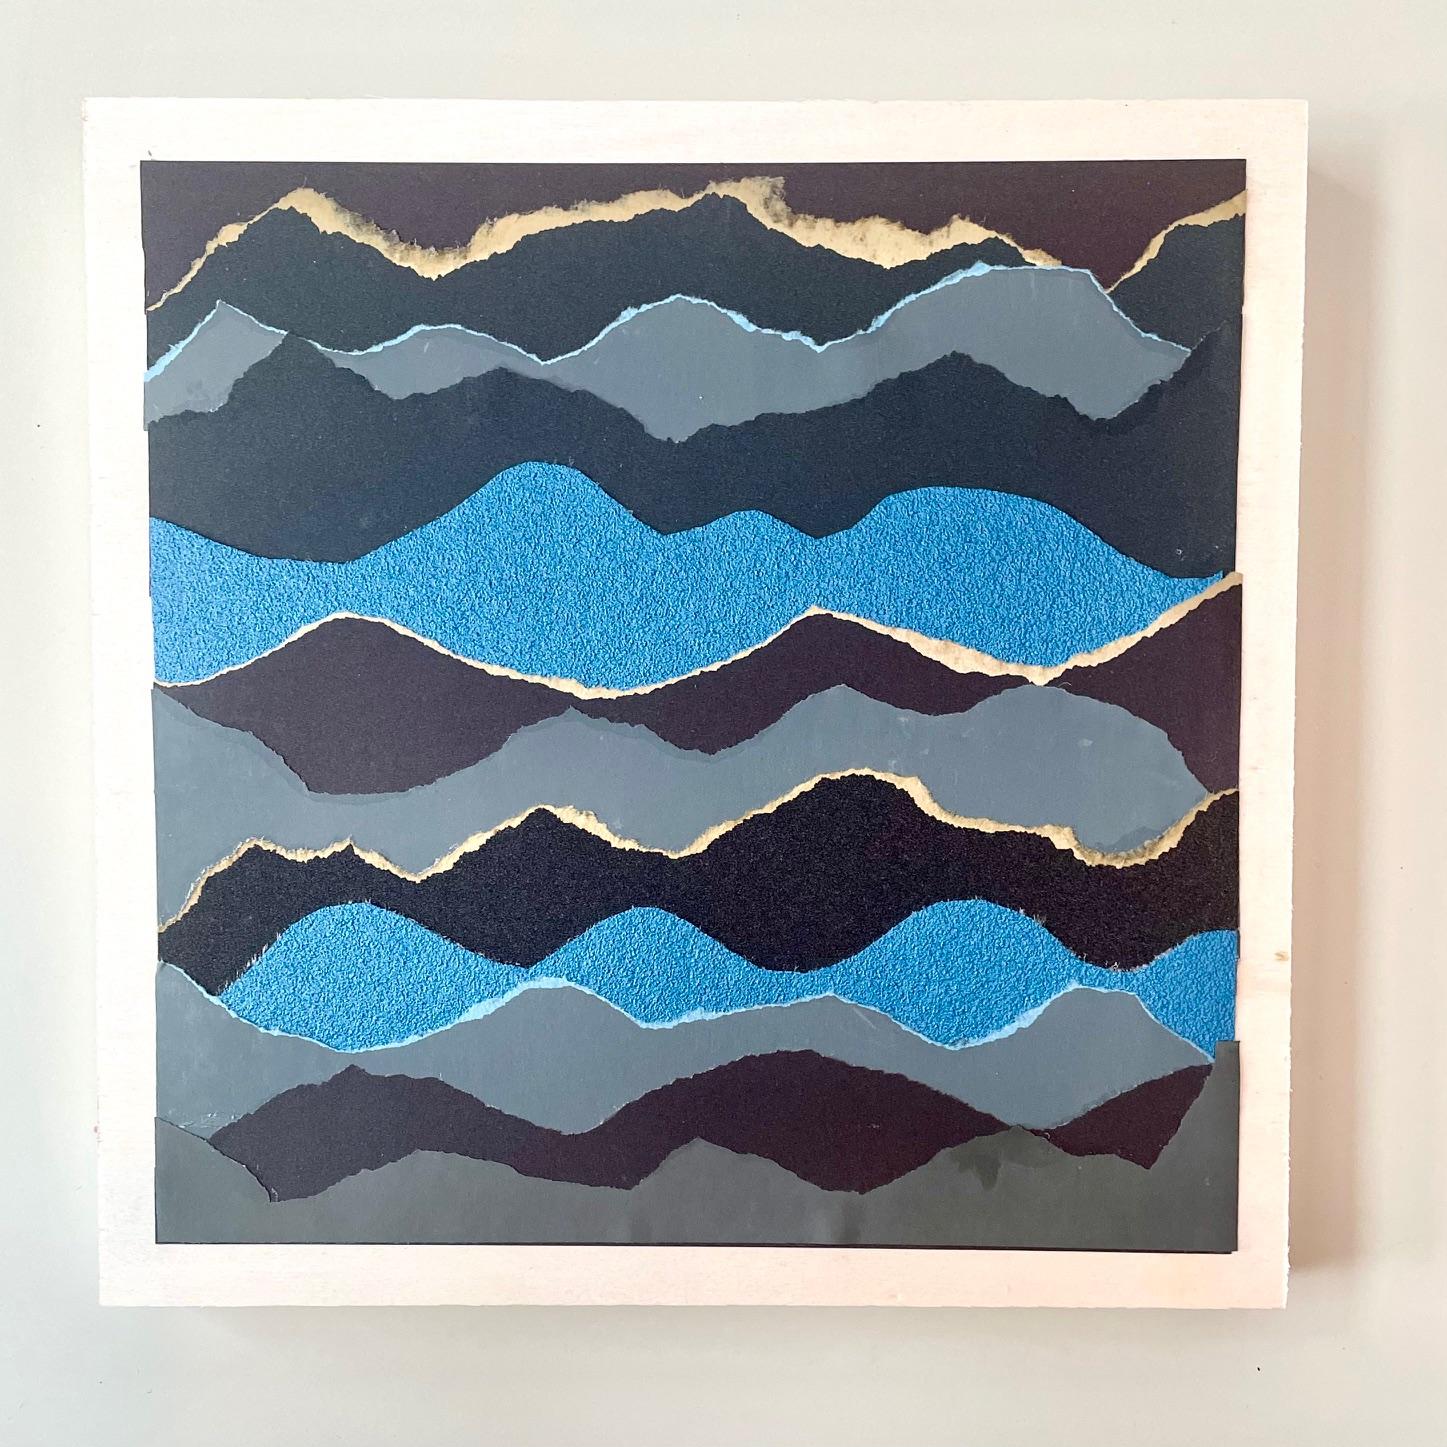 Fluctus 1  - Blue grey black abstract seascape paper collage on wood board - Art by Marie Laforey